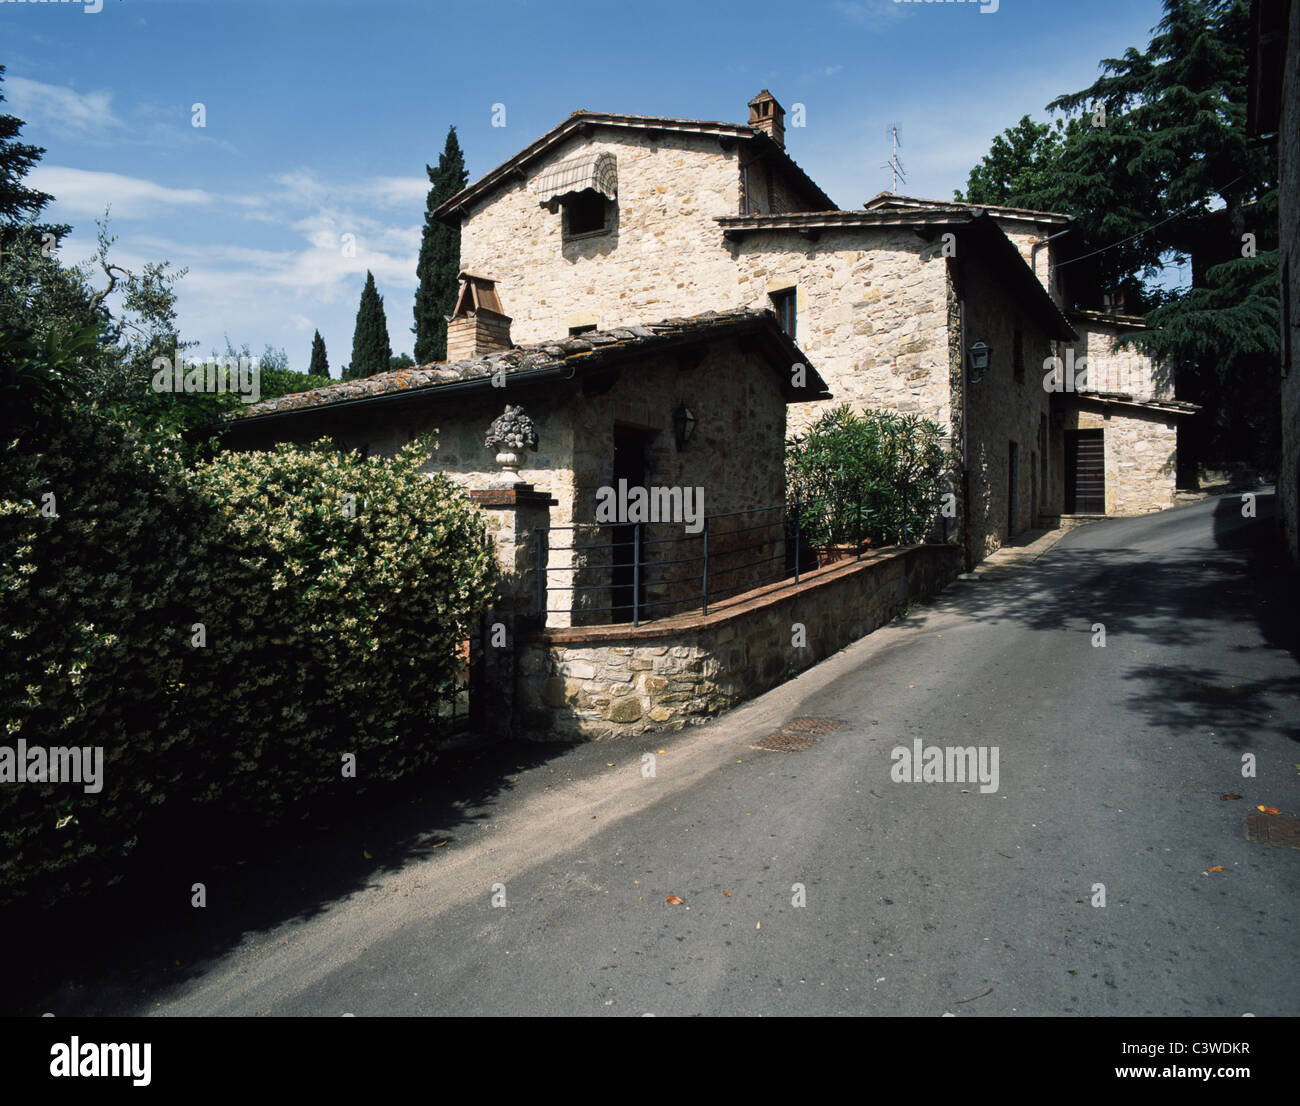 Street and houses in Gaiole in Chianti, Tuscany, Italy Stock Photo